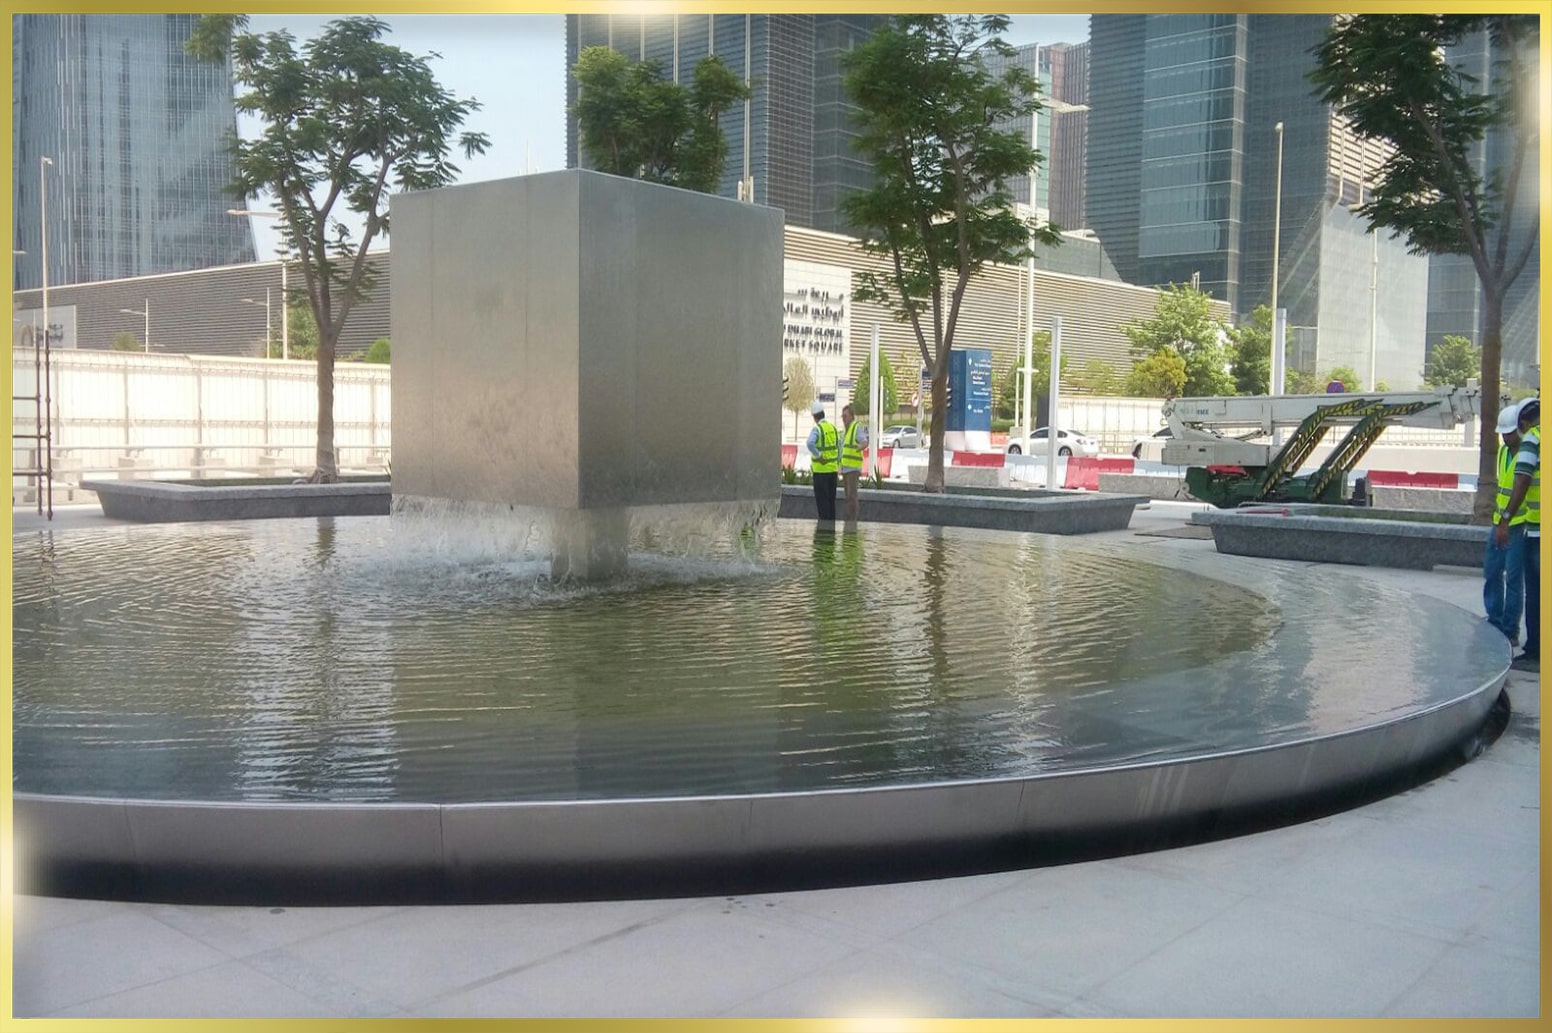 Stainless Steel Water Feature in UAE